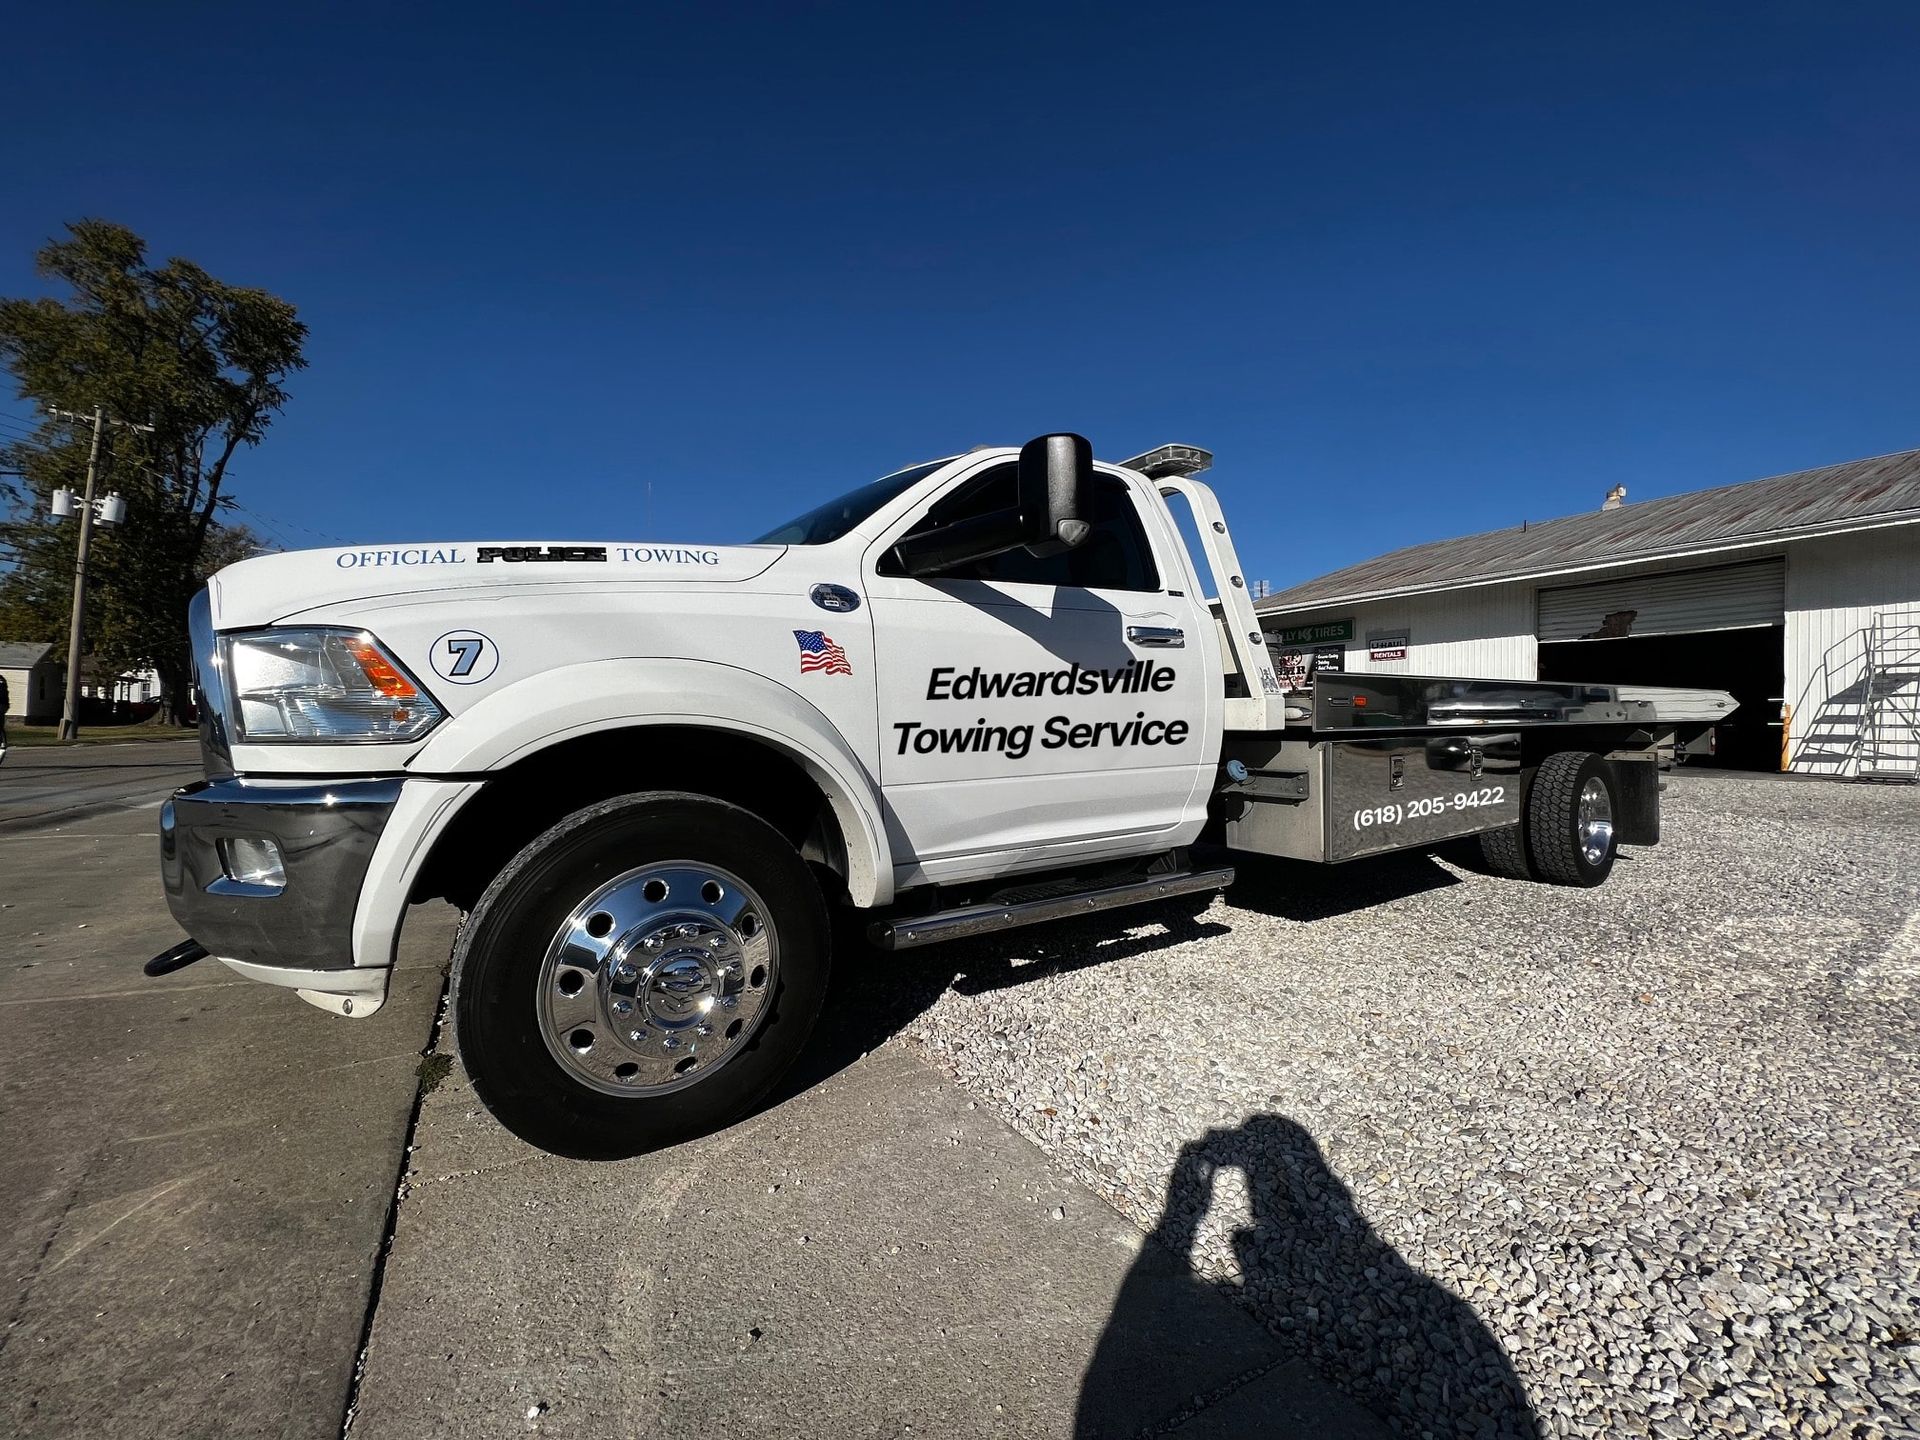 a white tow truck from edwardsville towing service